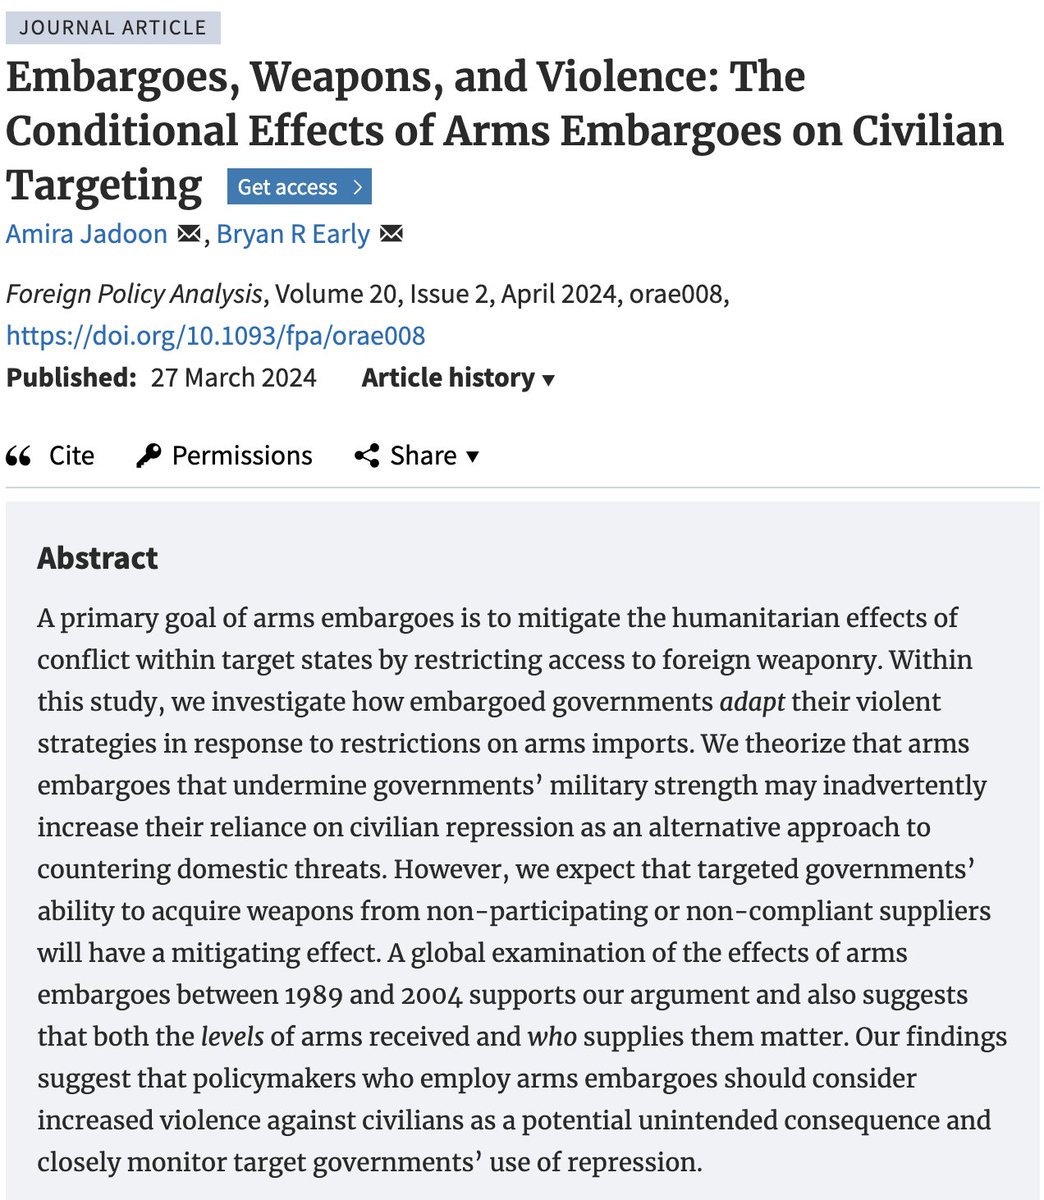 In their new 2024 article 'Embargoes, Weapons, and Violence', @AmiraJadoon and @B_R_Early examine how embargoed governments adapt their violent strategies in response to restrictions on arms imports #ForeignPolicy #PoliticalScienceTwitter academic.oup.com/fpa/article-ab…